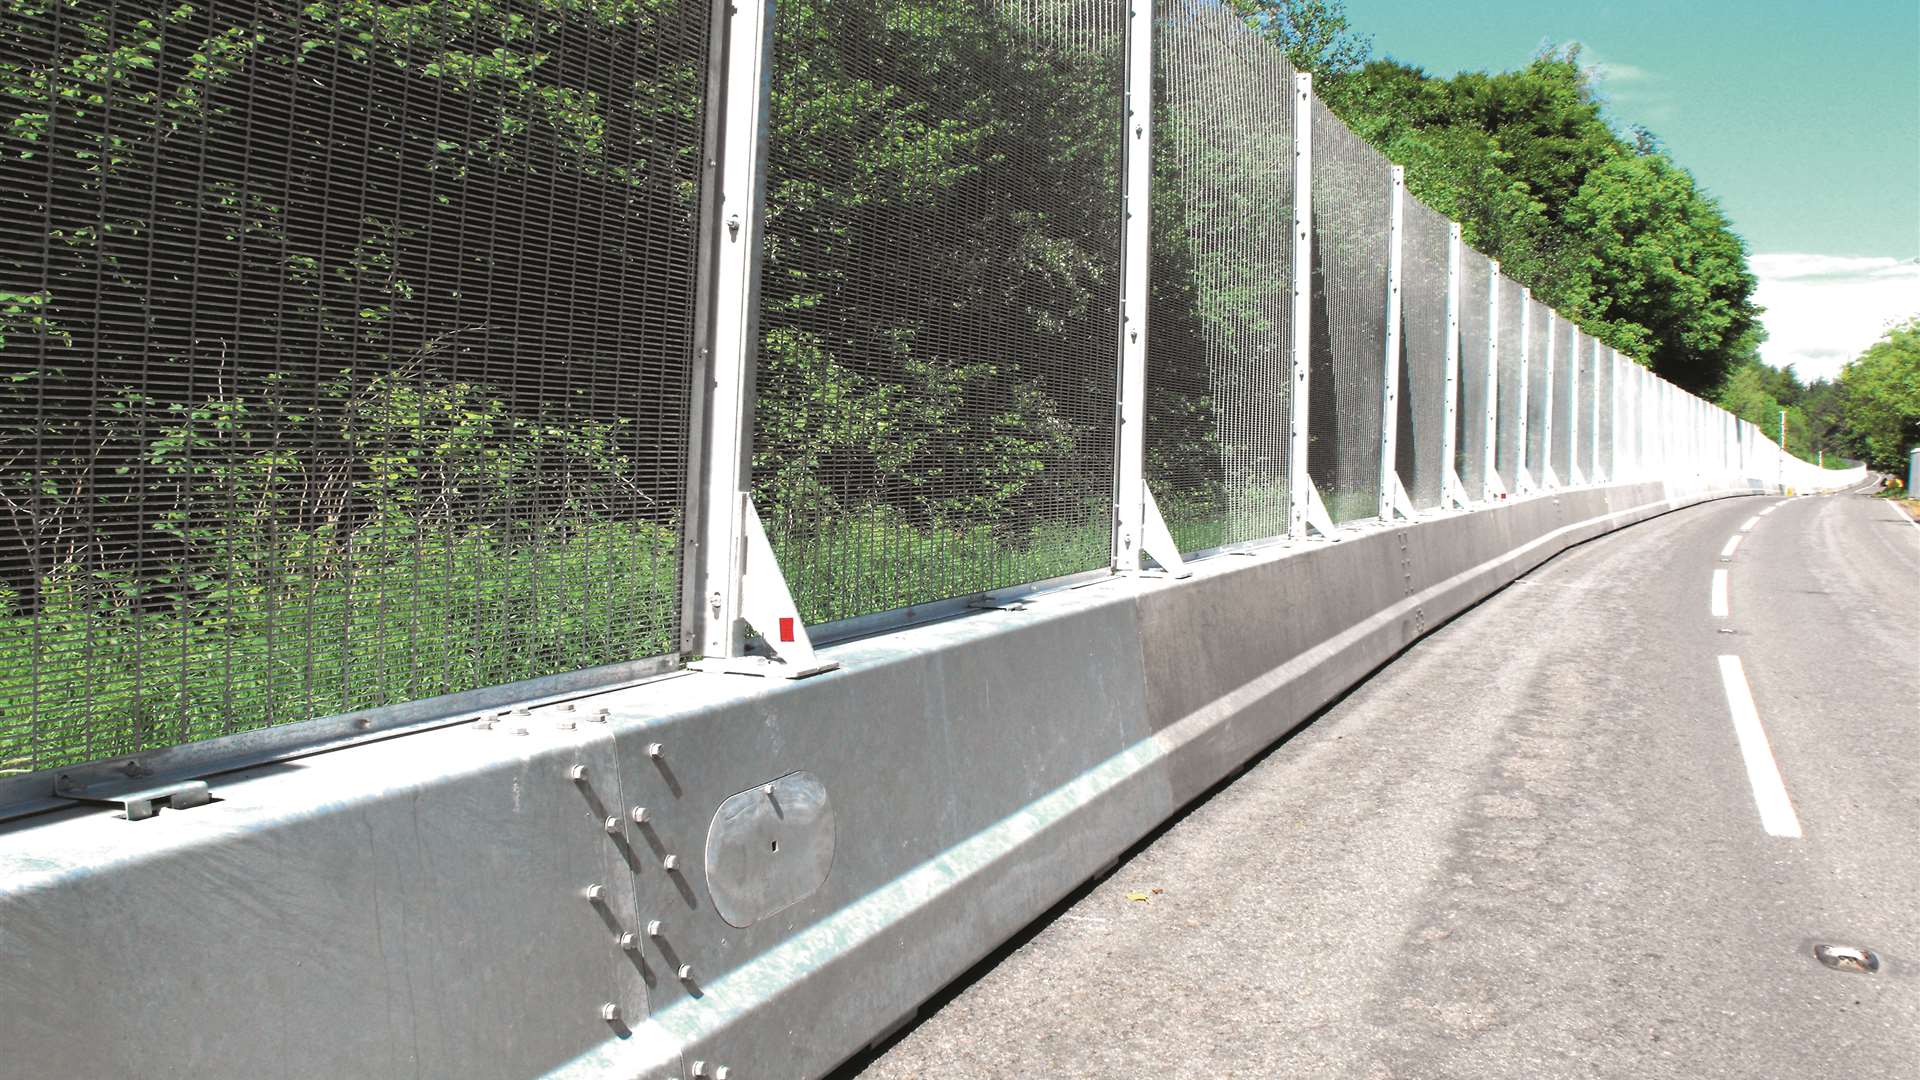 Highway Care makes crash barriers